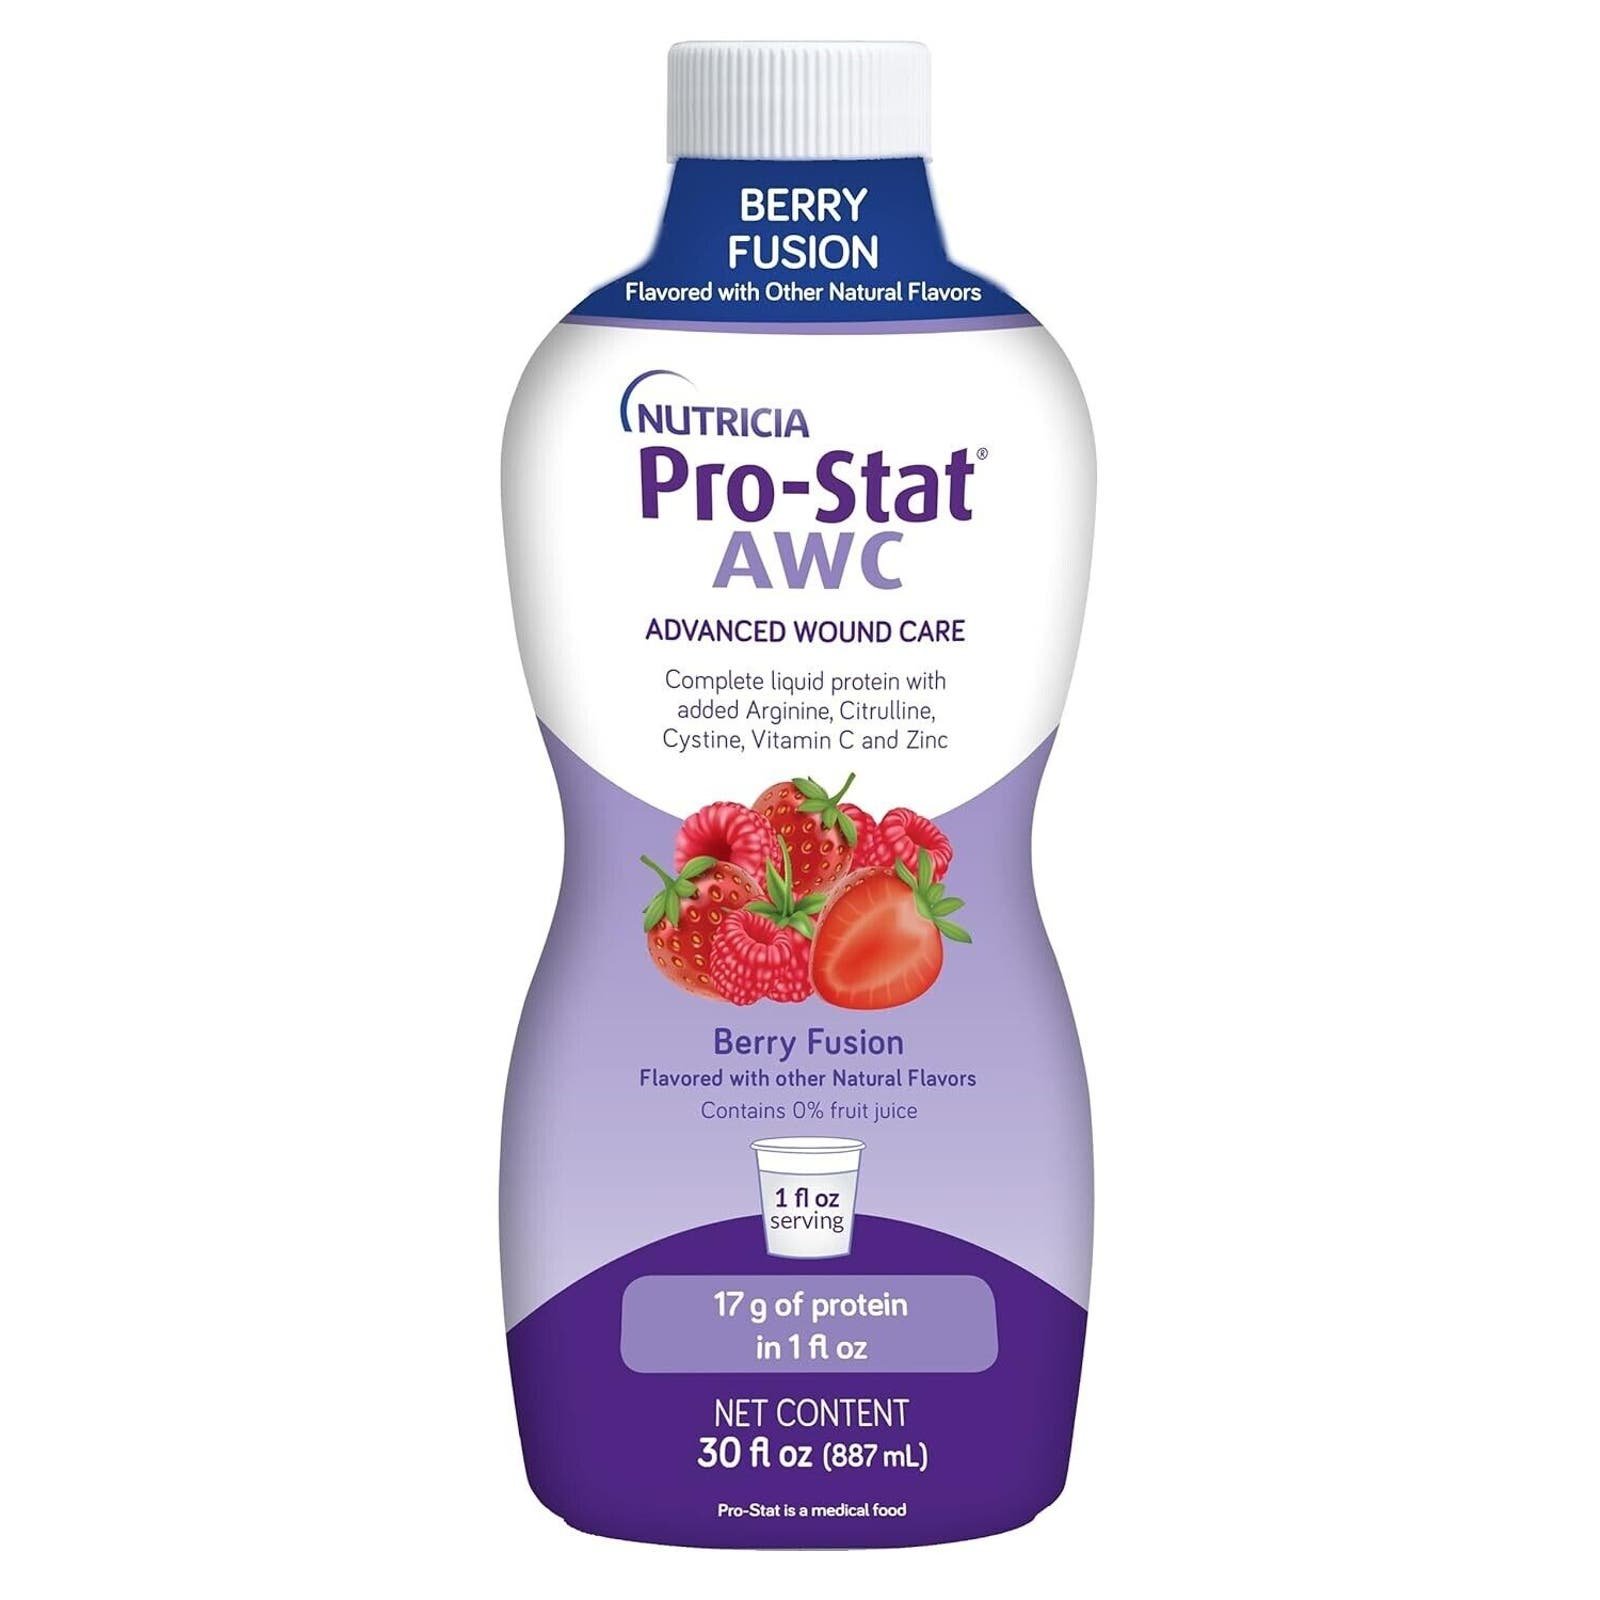 NEW CASE of 4 Pro-Stat AWC Liquid Protein Berry Fusion 